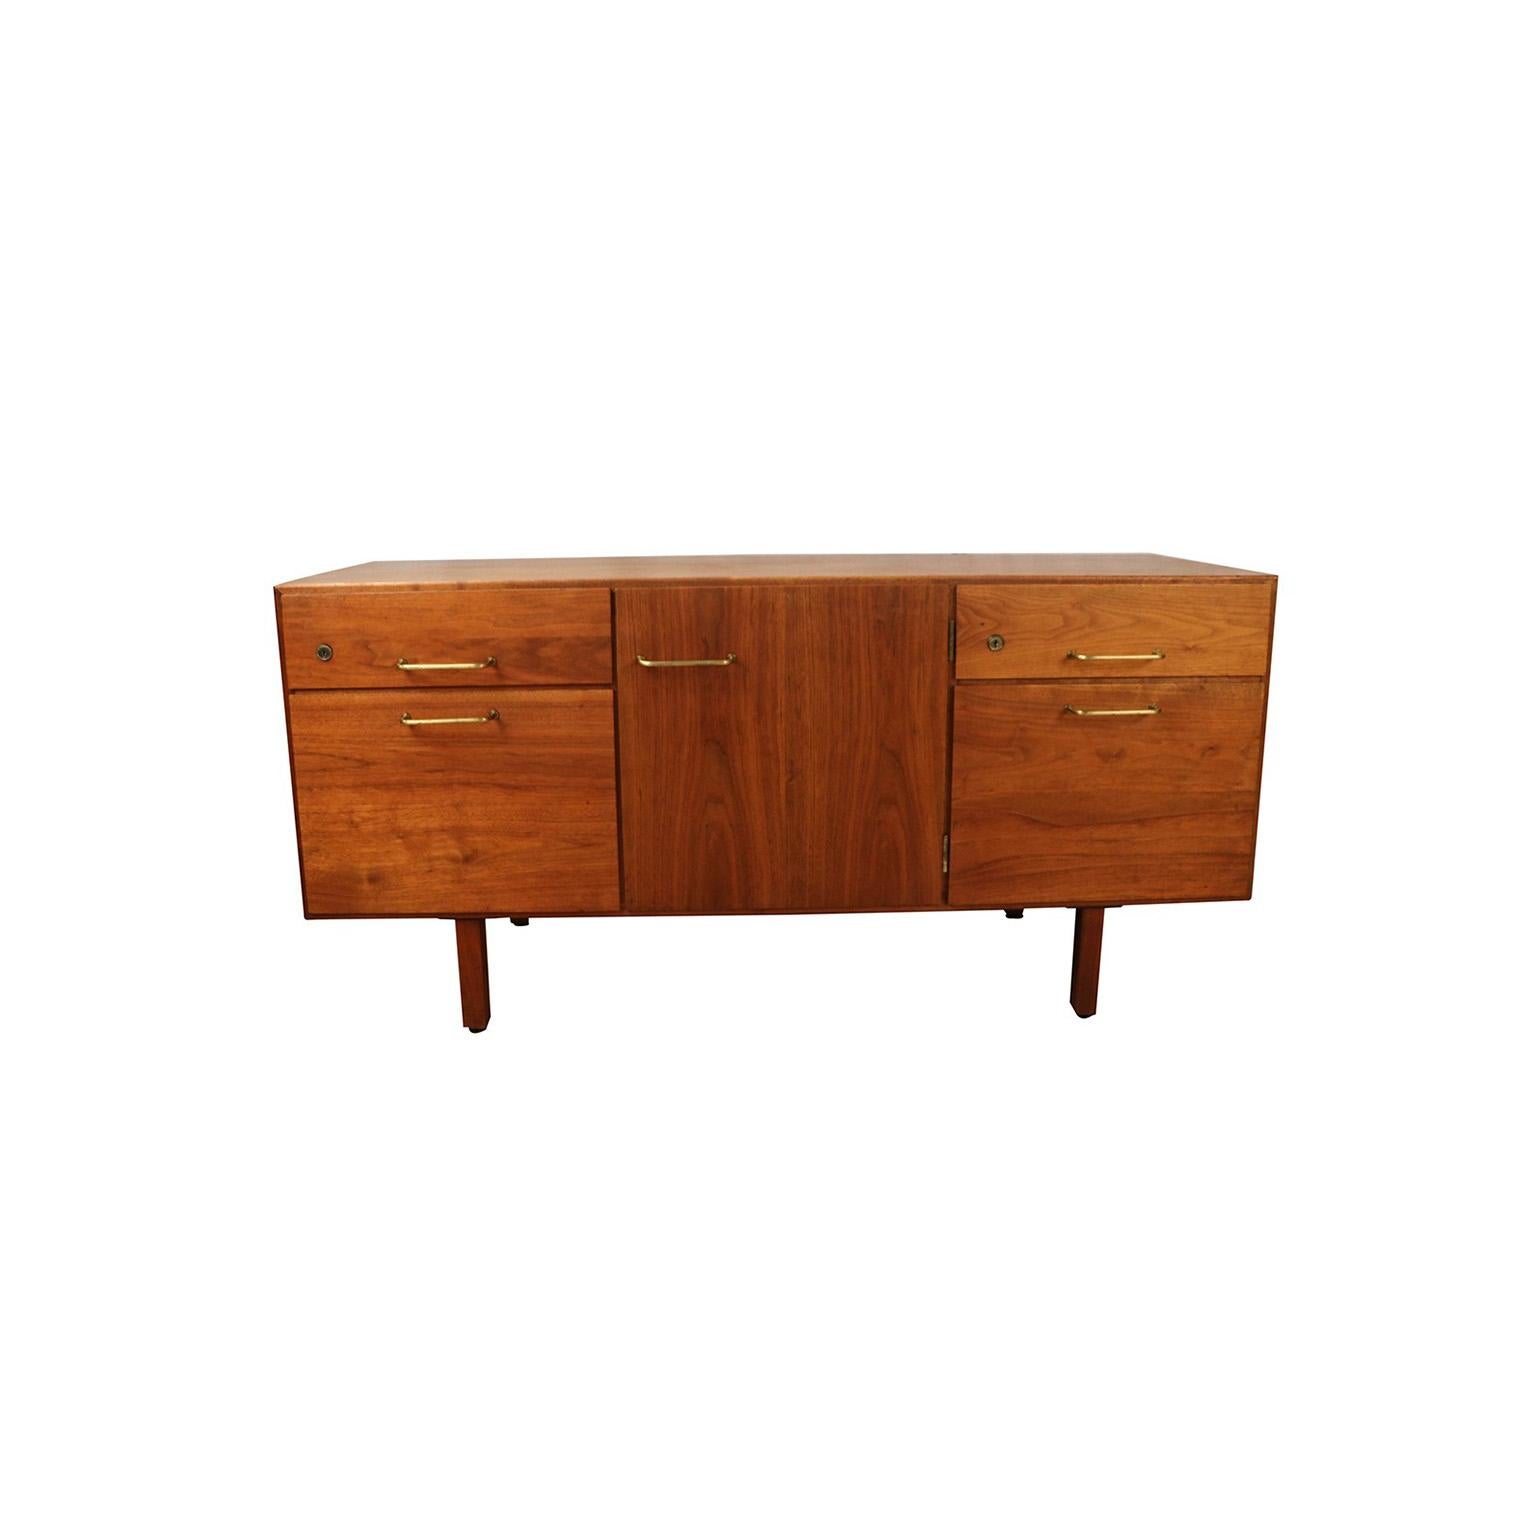 An exceptional and solid midcentury walnut file cabinet/credenza by iconic designer Jens Risom, circa 1960s, manufactured in the USA. This absolutely stunning piece features gorgeous walnut wood grain, stylish brass pulls and door hinges, a low